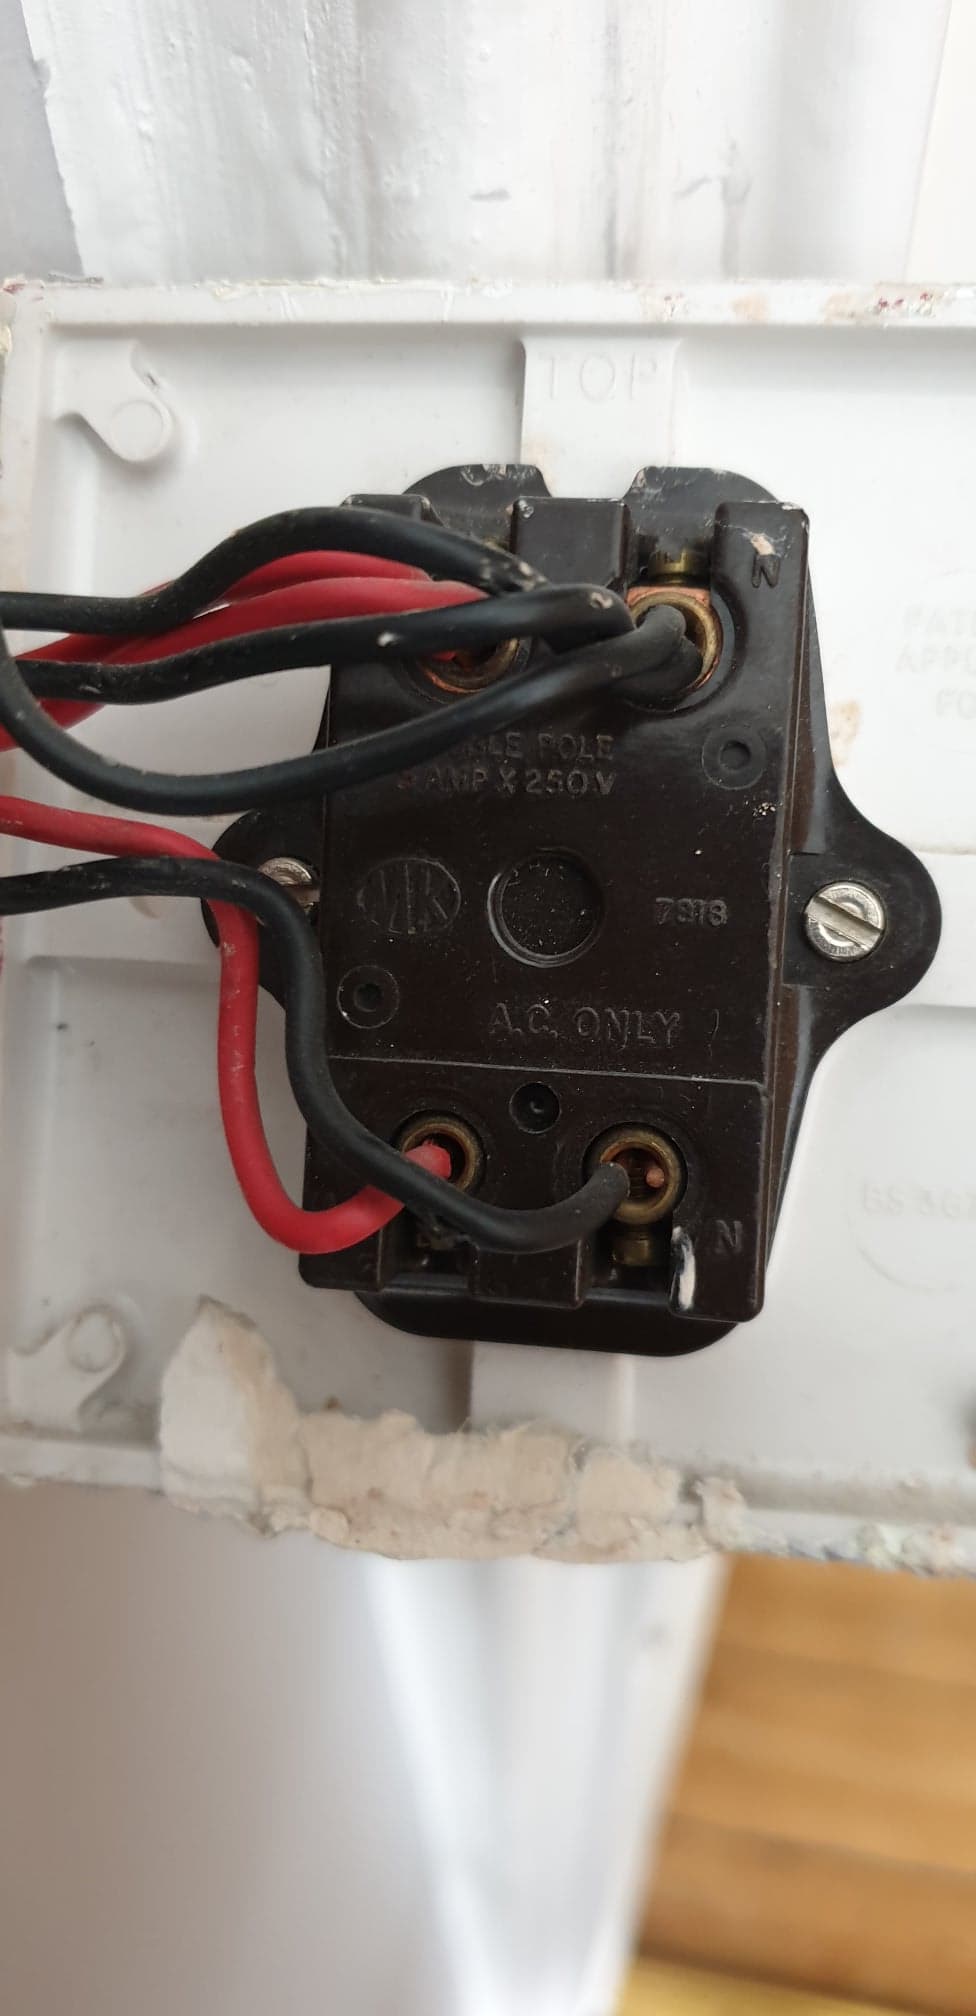 Lightswitch wiring from 4 wires to 2 wires? {filename} | ElectriciansForums.net